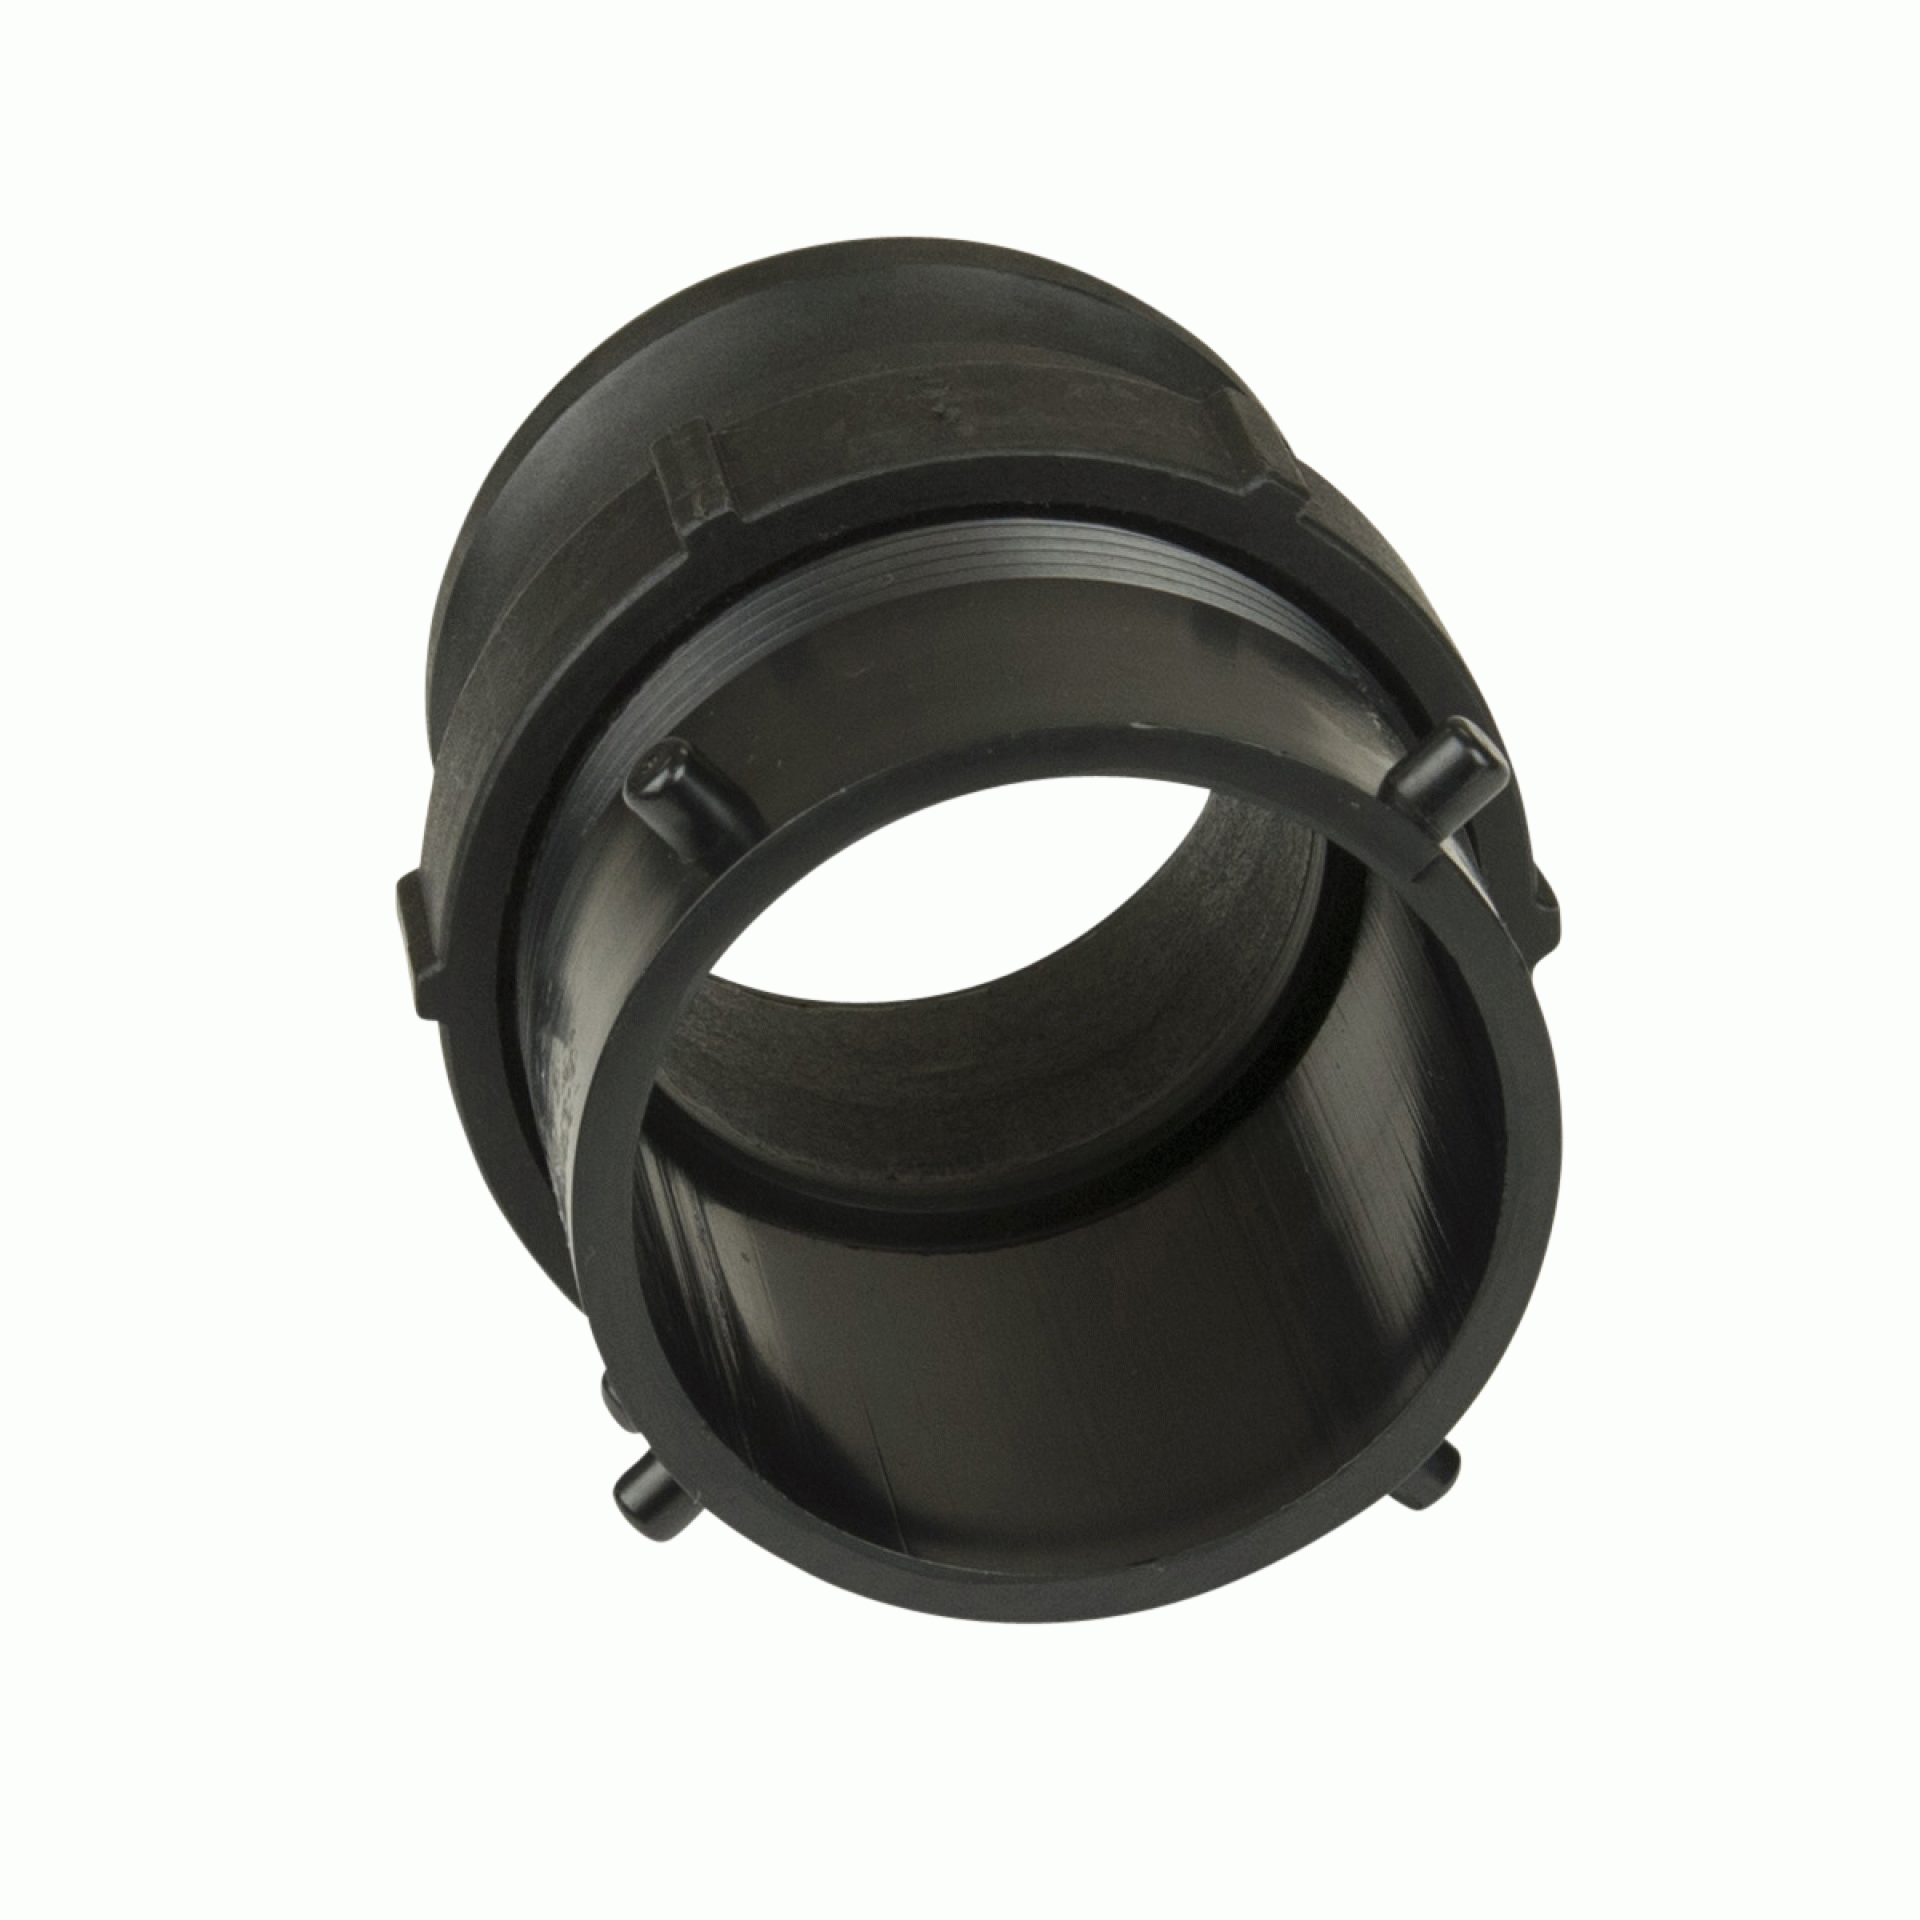 Lippert Components | 360785 | Back To Bayonet Fitting for Waste Master